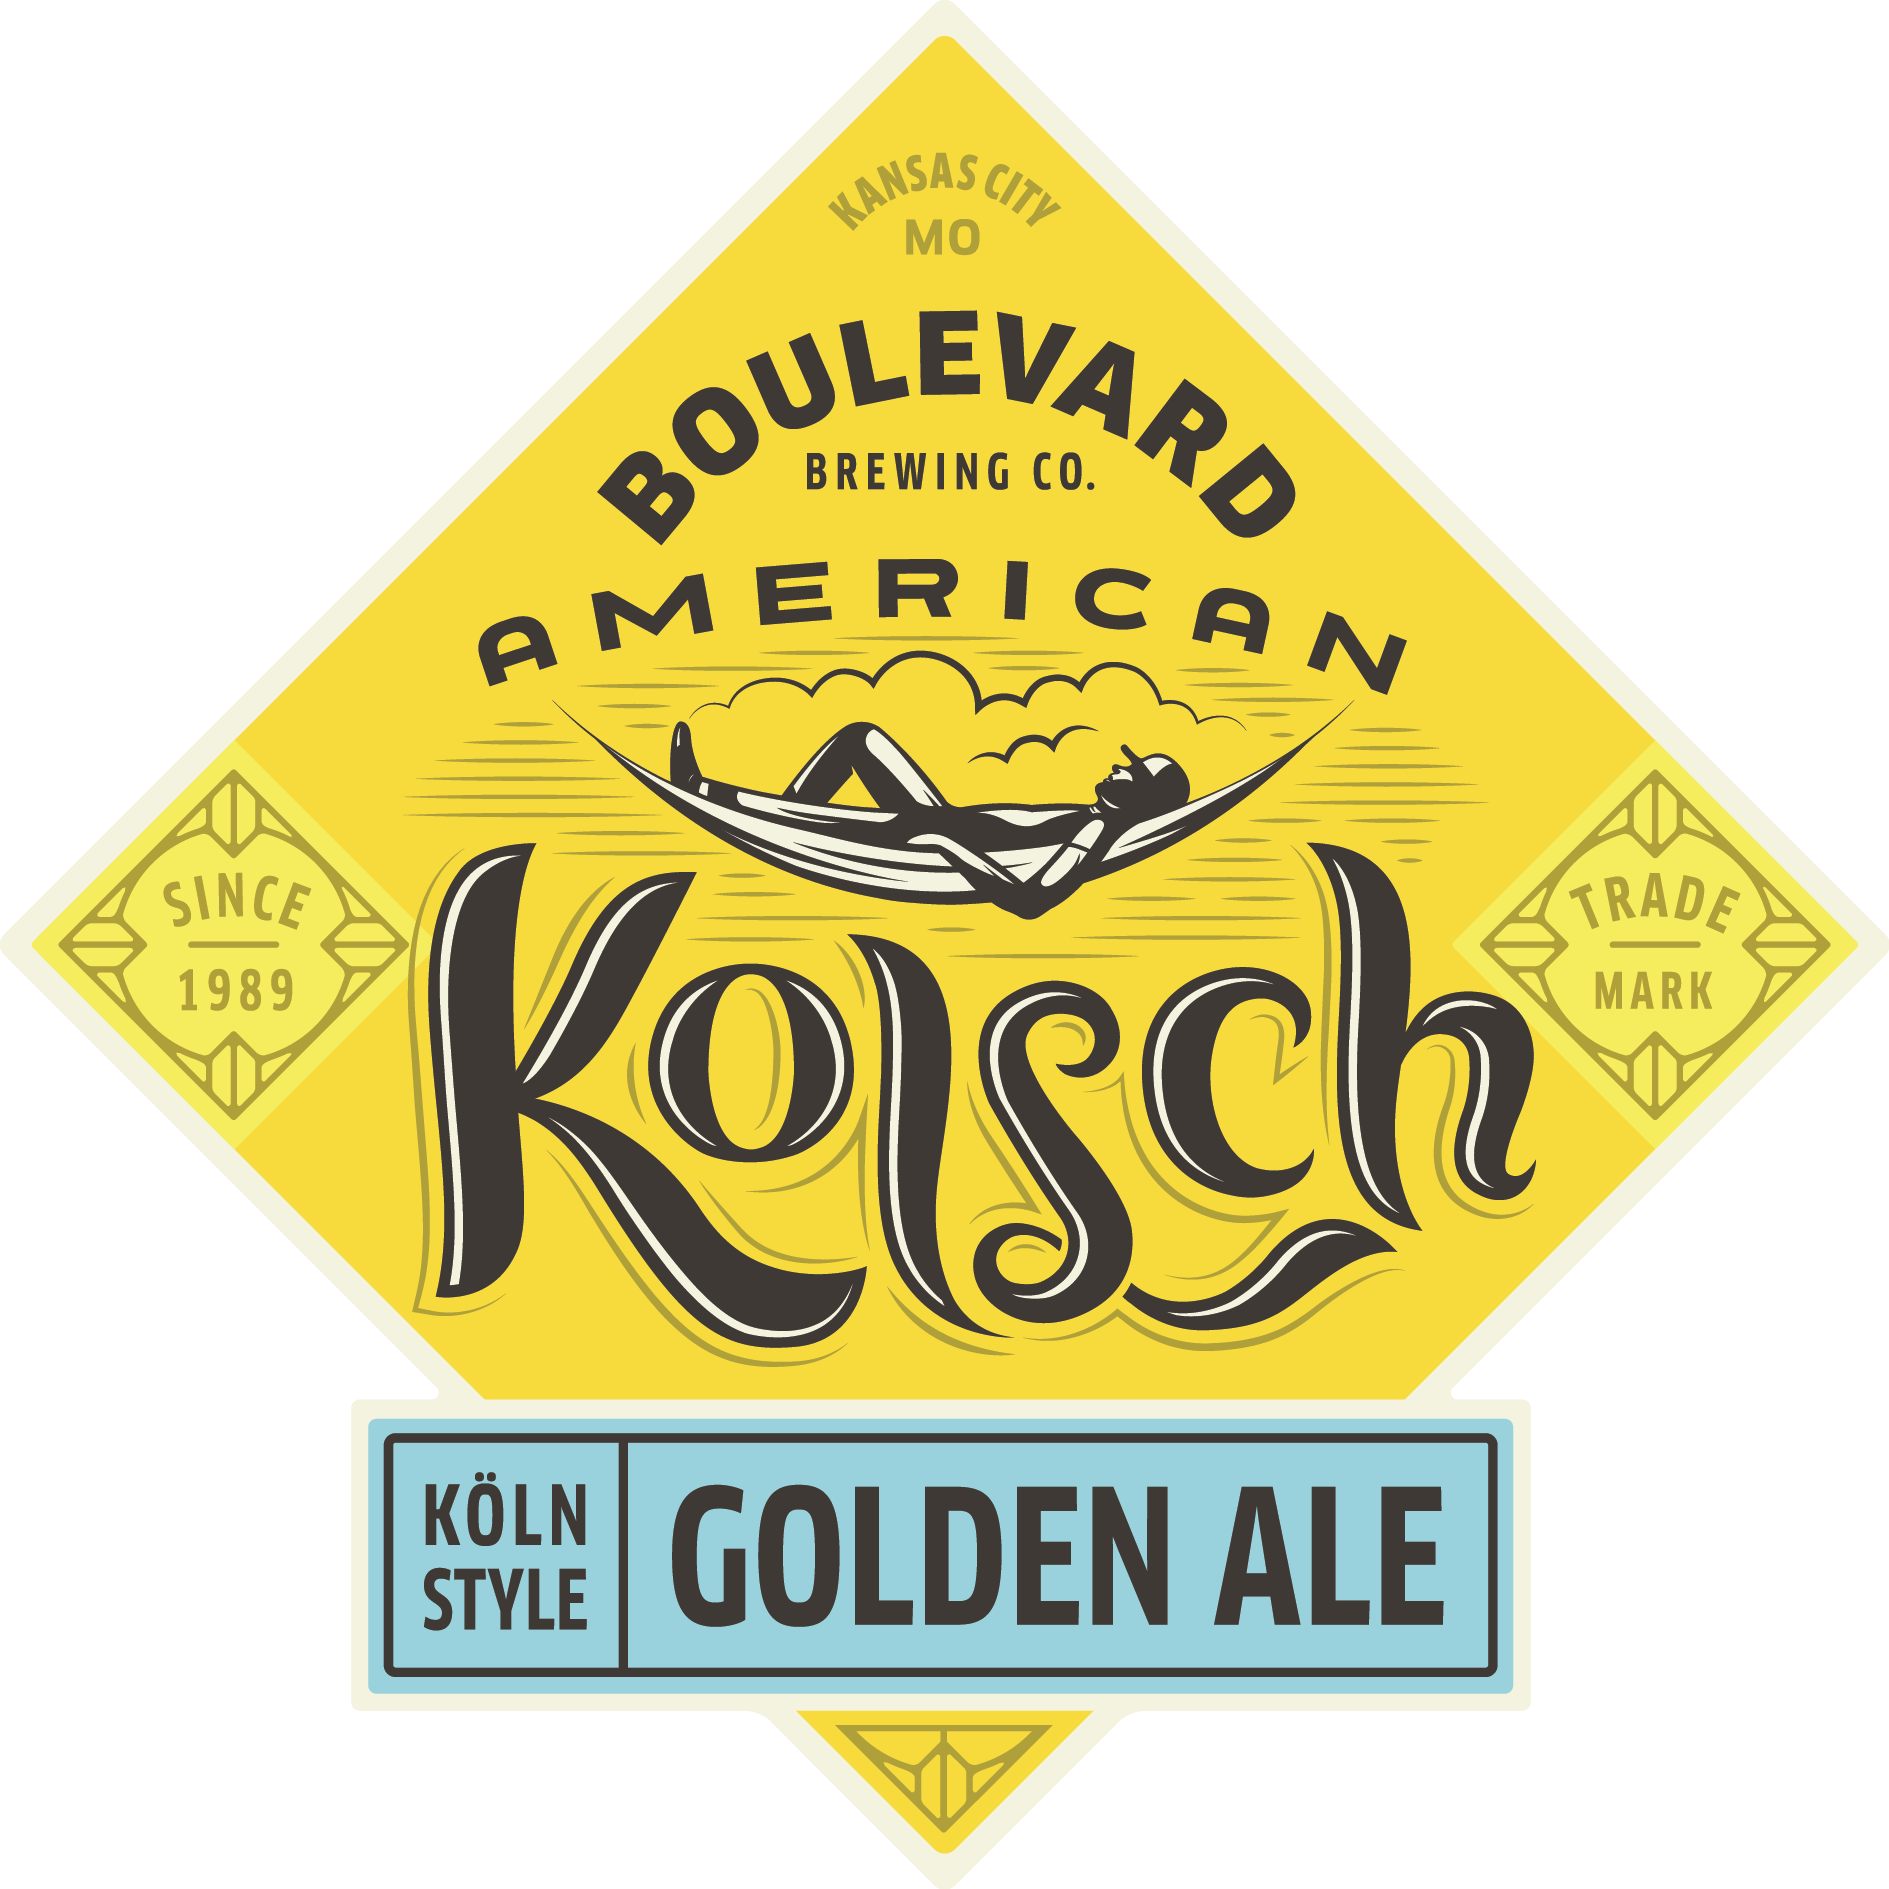 Blvd Beer Logo - About Our Beers | Boulevard Brewing Company